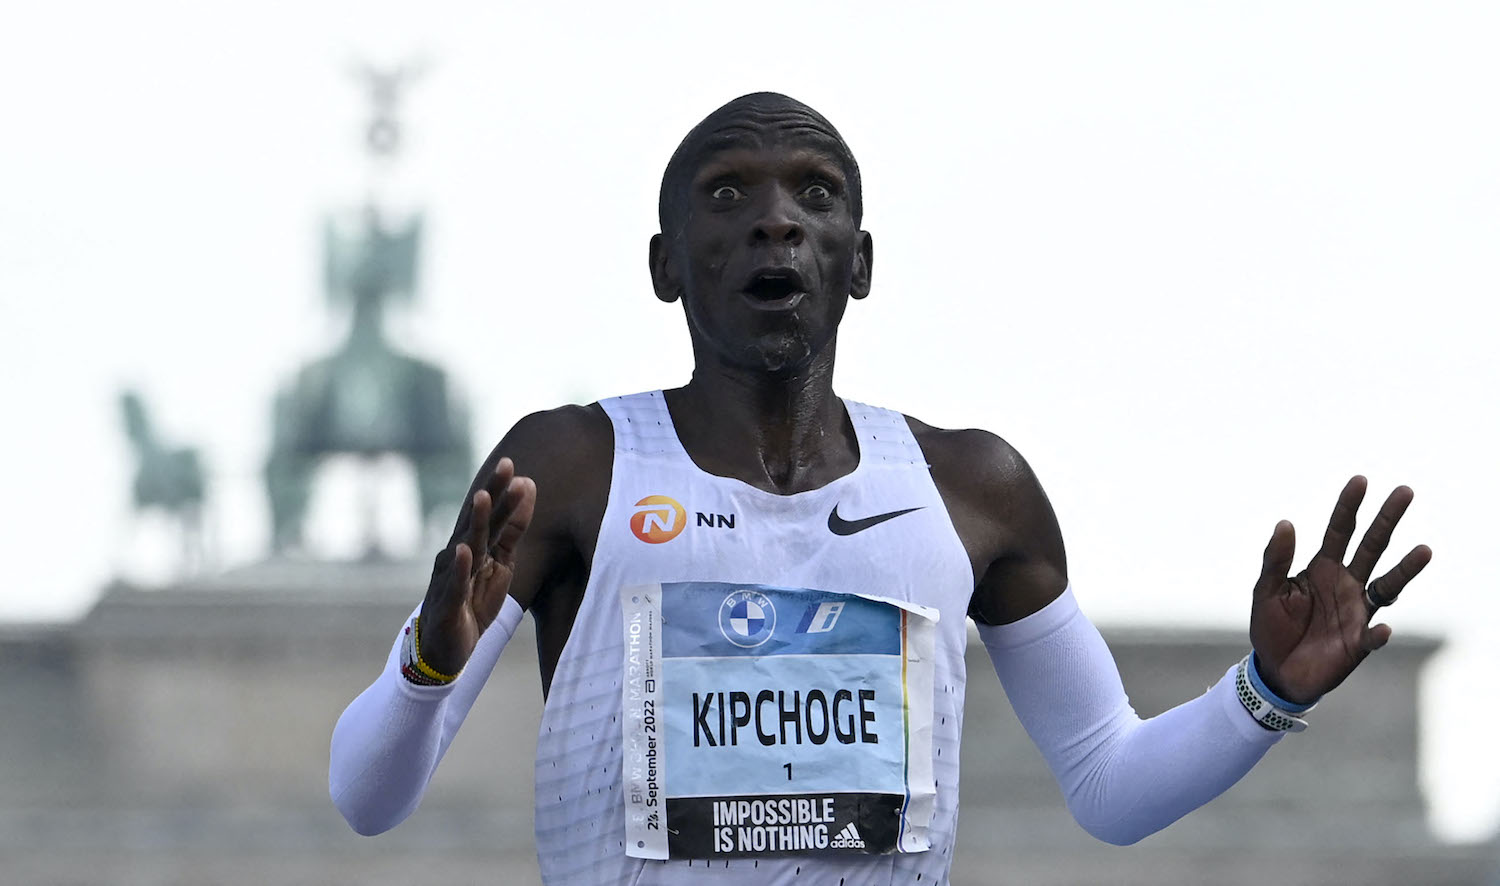 TOPSHOT - Kenya's Eliud Kipchoge crosses the finish line to win the Berlin Marathon race on September 25, 2022 in Berlin. - Kipchoge has beaten his own world record by 30 seconds, running 2:01:09 at the Berlin Marathon. (Photo by Tobias SCHWARZ / AFP)